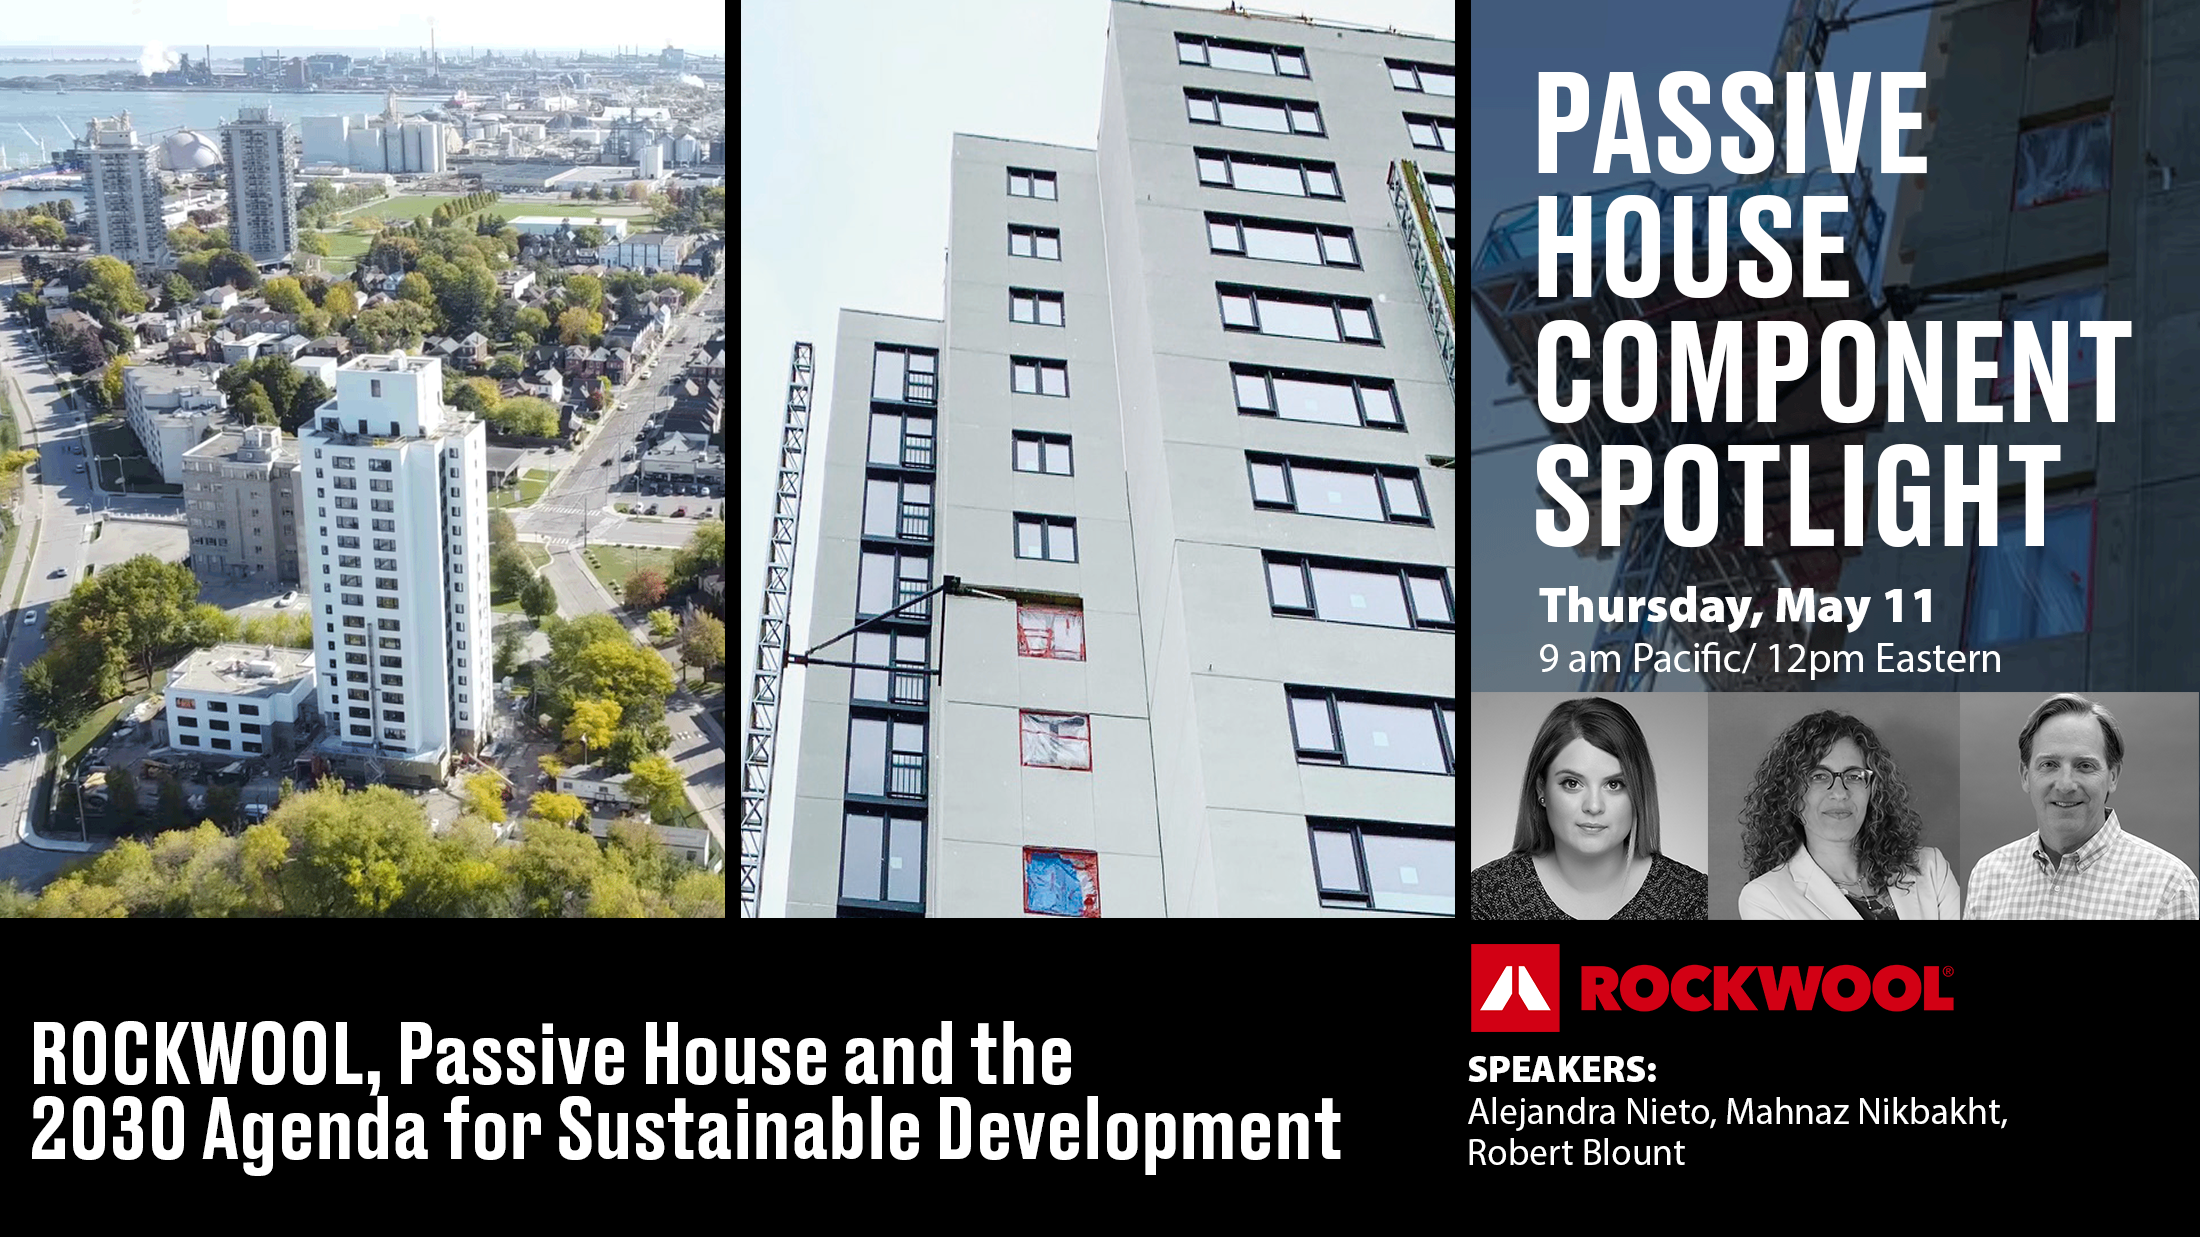 ROCKWOOL, Passive House and the 2030 Agenda for Sustainable Development